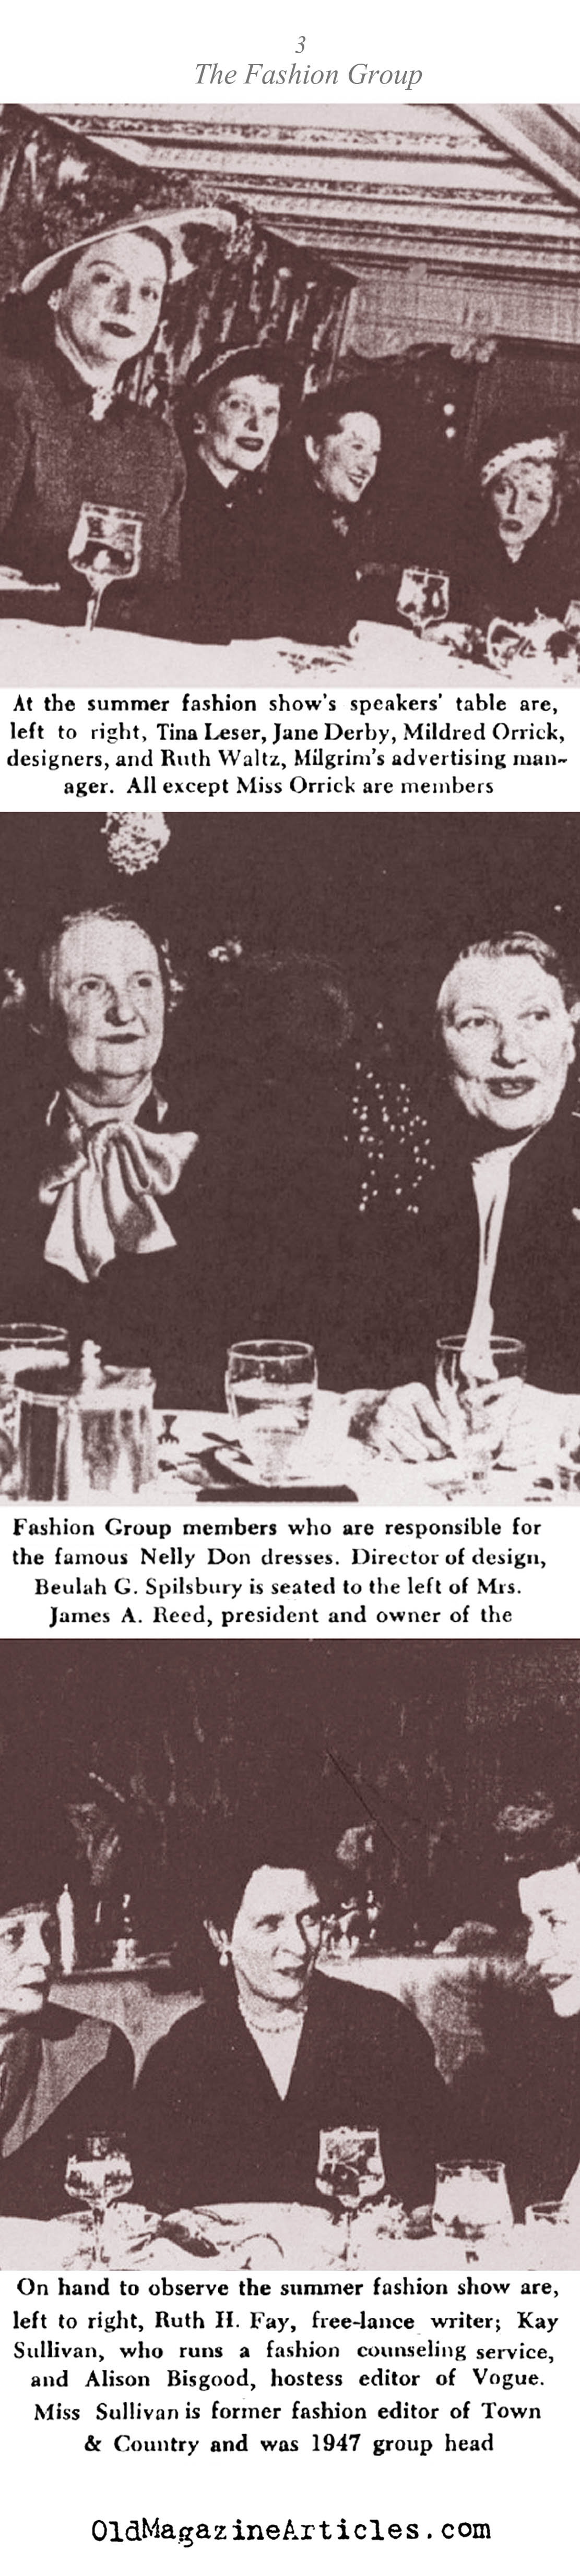 The Fashion Group (Collier's Magazine, 1948)